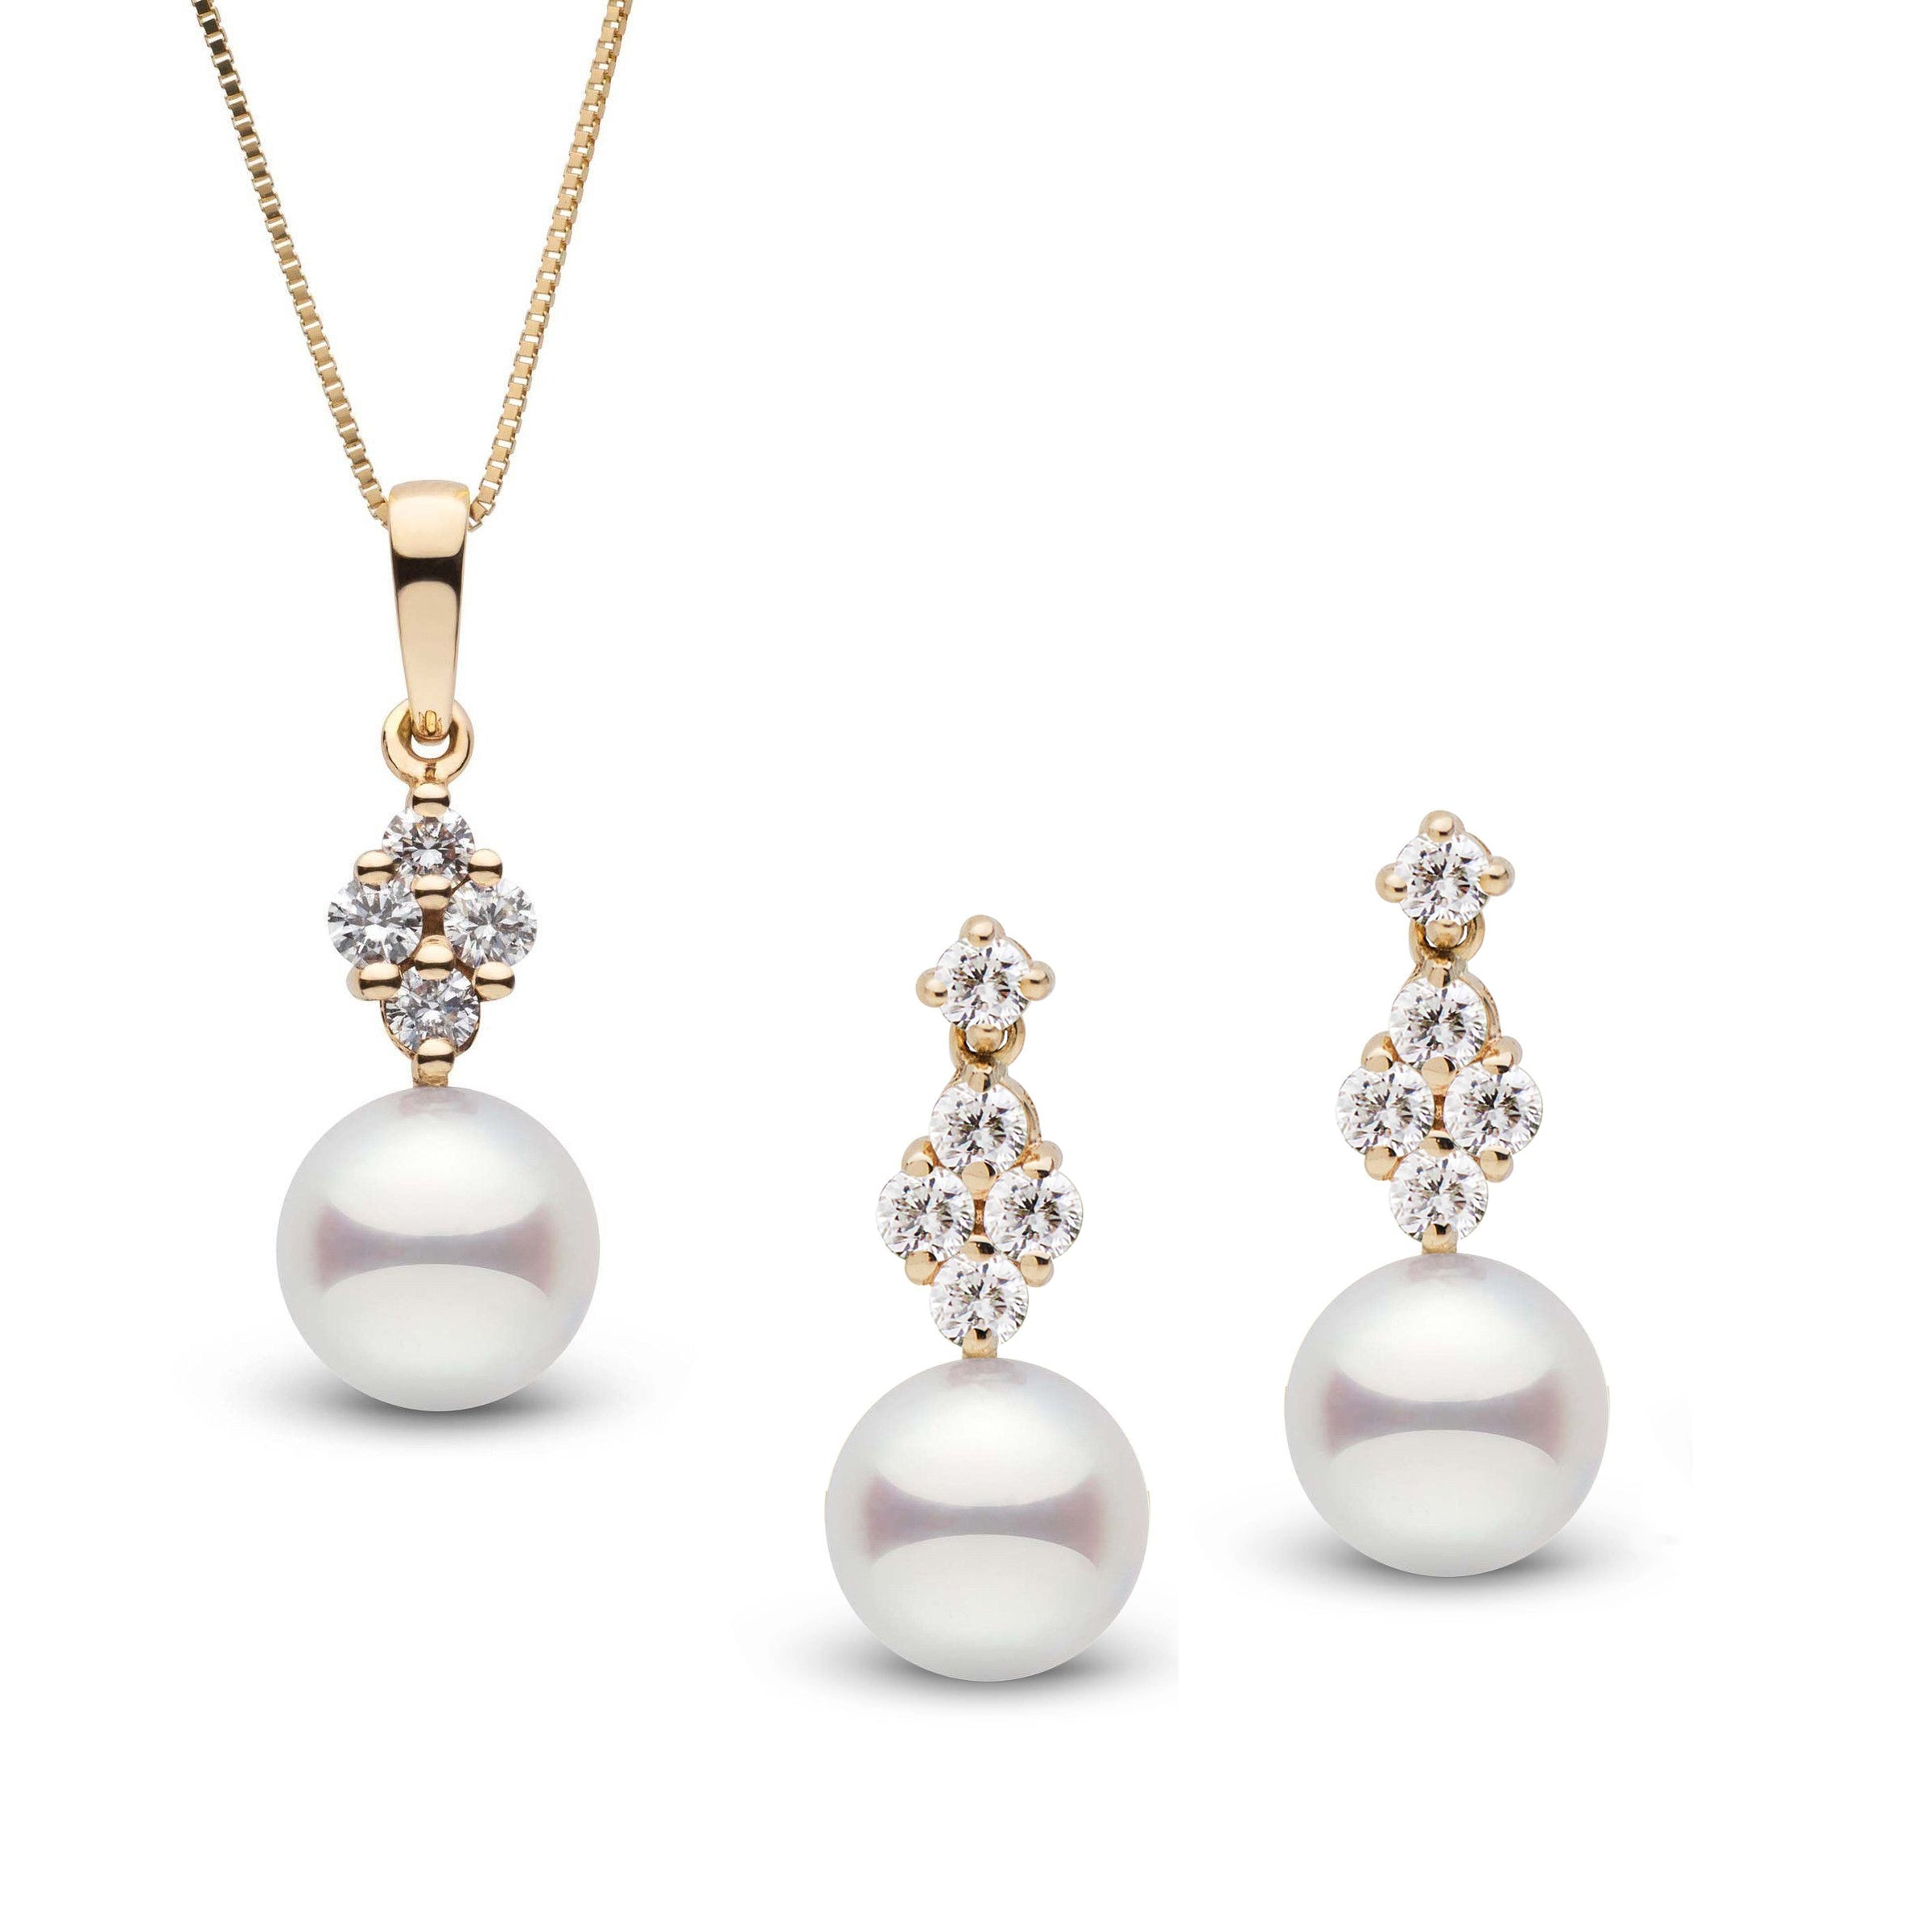 9.0-9.5 mm AAA Akoya Pearl and VS1-G Diamond Elegance Collection Pendant and Earrings Set in yellow gold